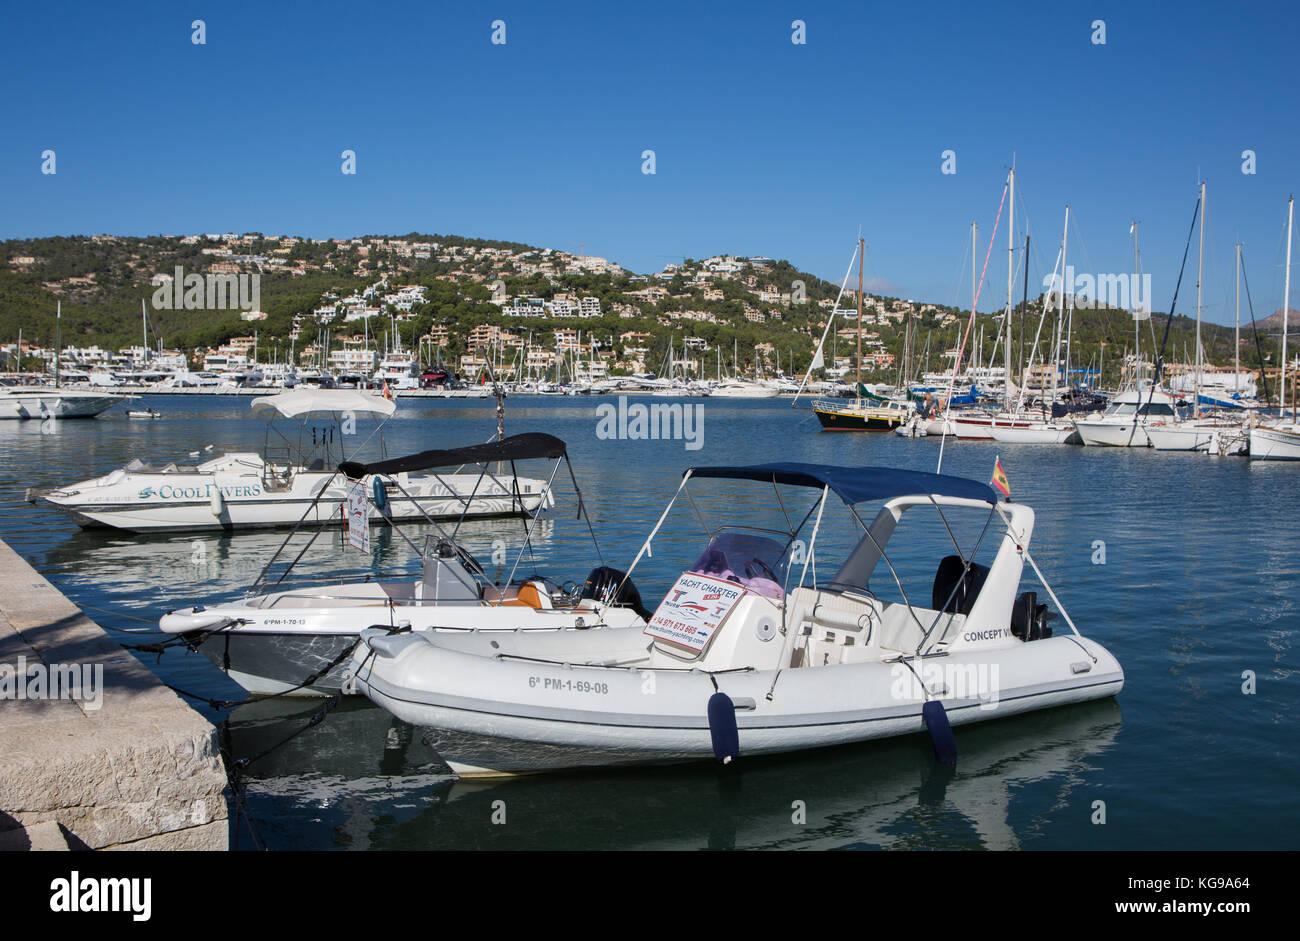 Yacht and boats moored at harbour, mountains in background, Port d' Andratx, Majorca, Balearic Islands, Spain. Stock Photo